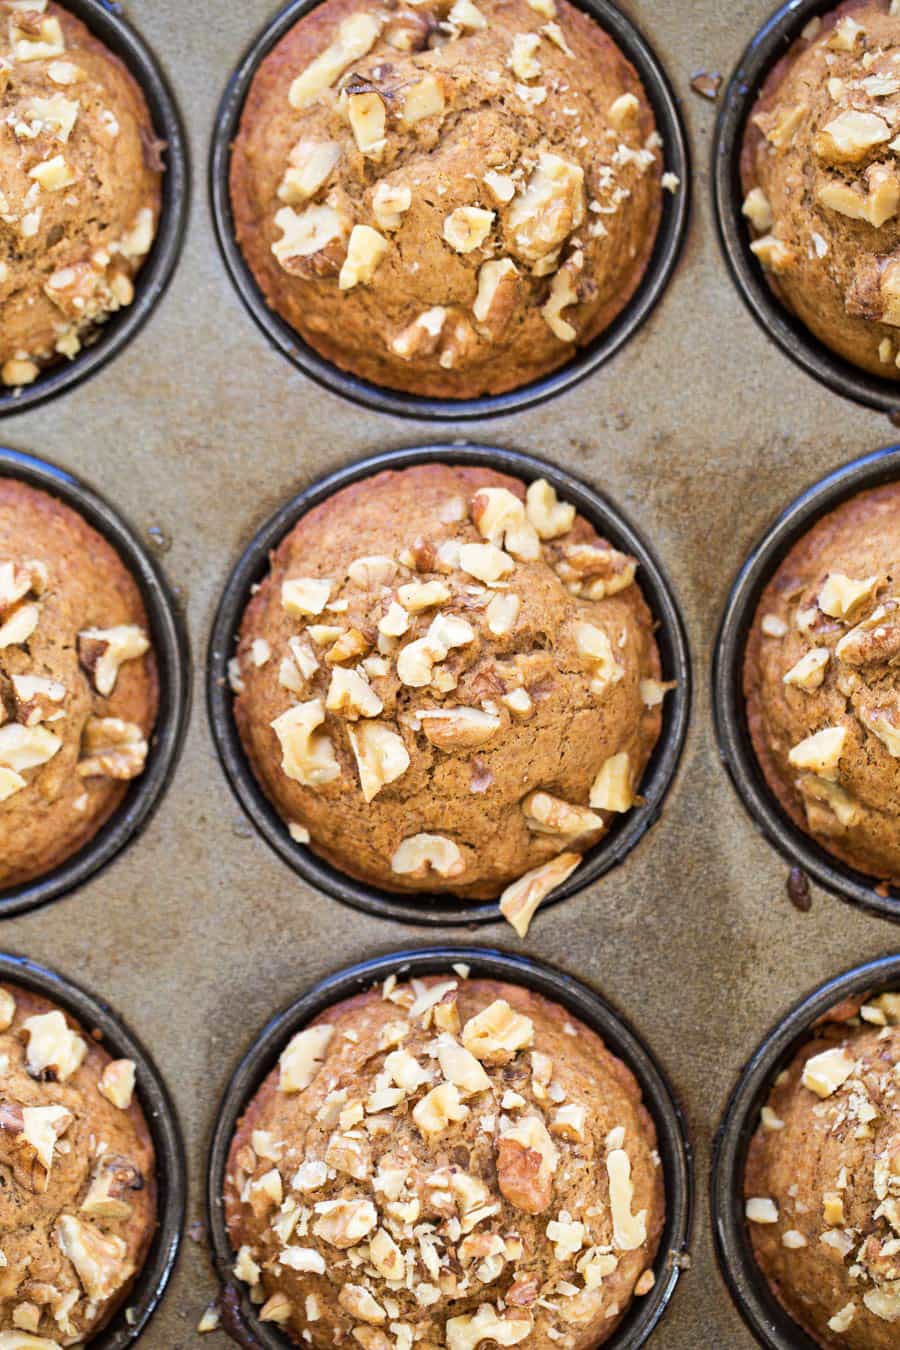 Overhead view of a muffin tin full of banana muffins topped with walnuts.